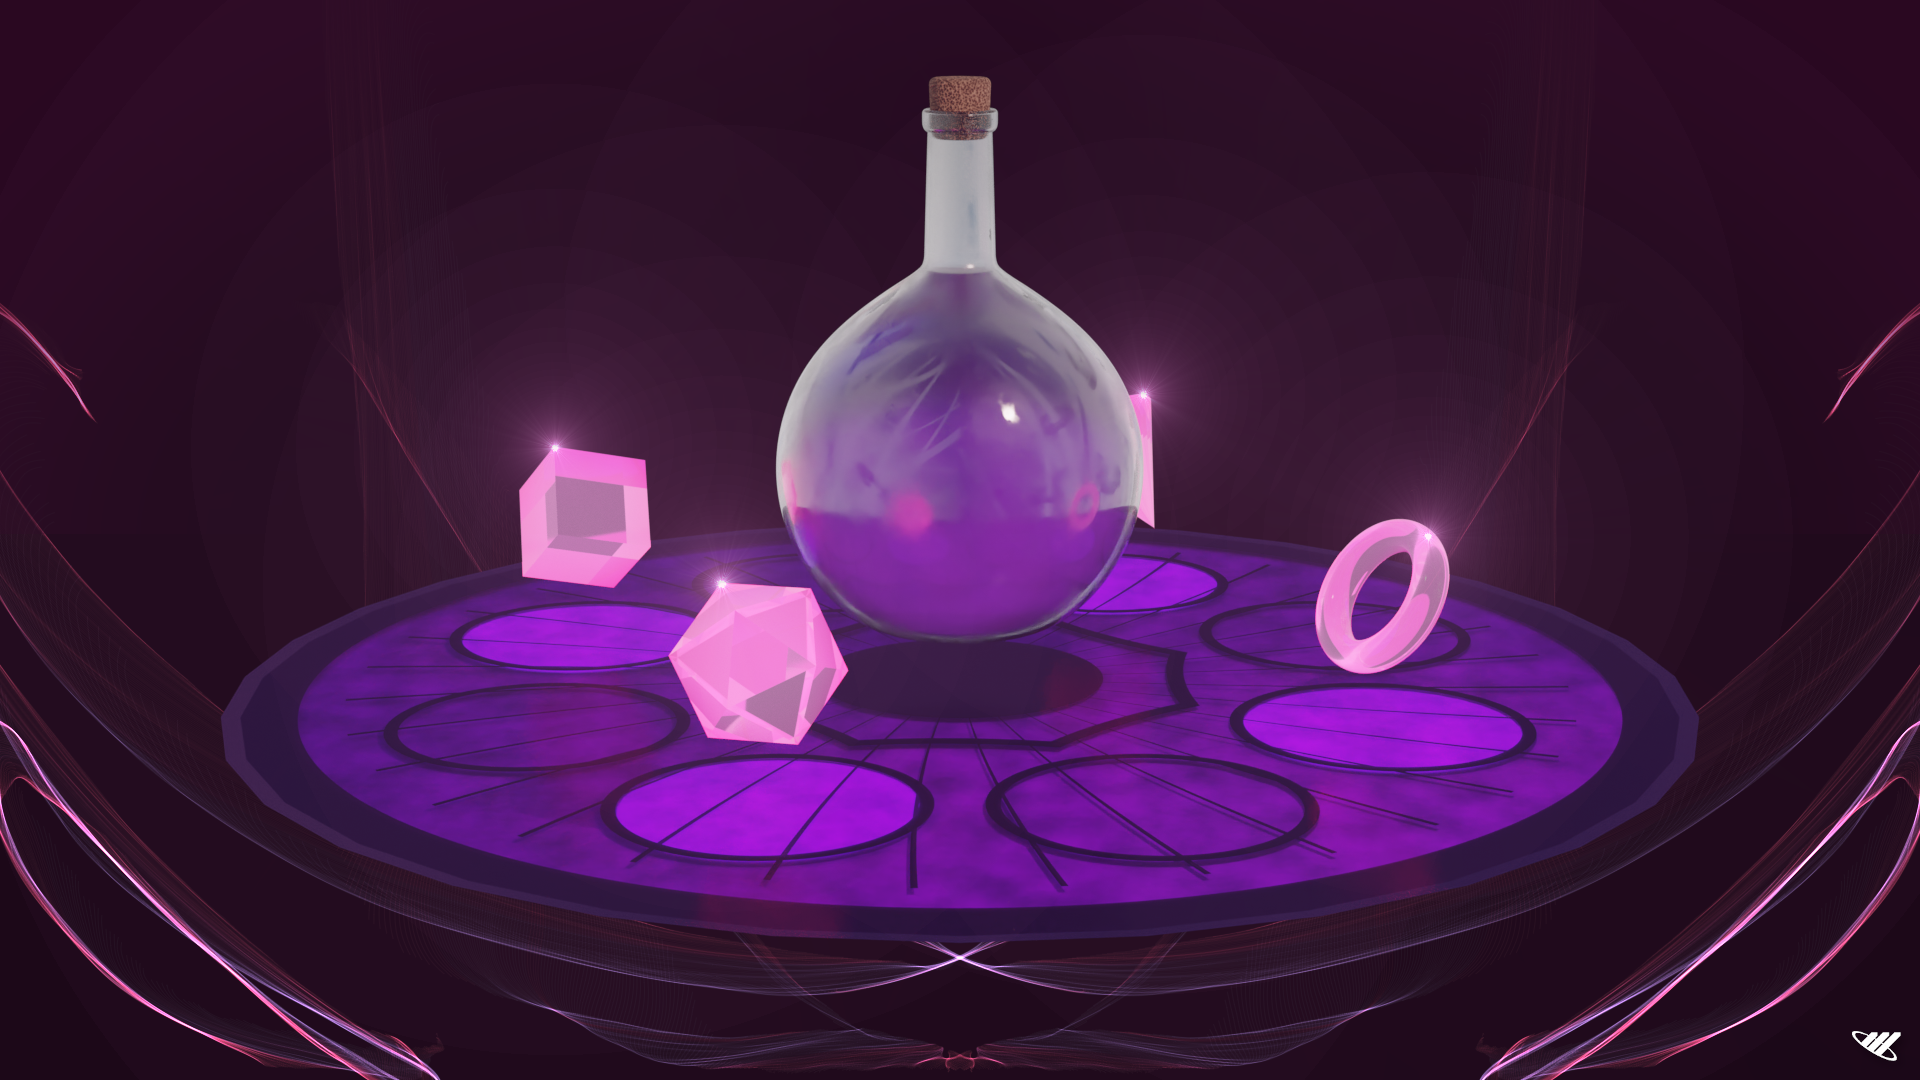 Potion floating above a magic circle around artifacts